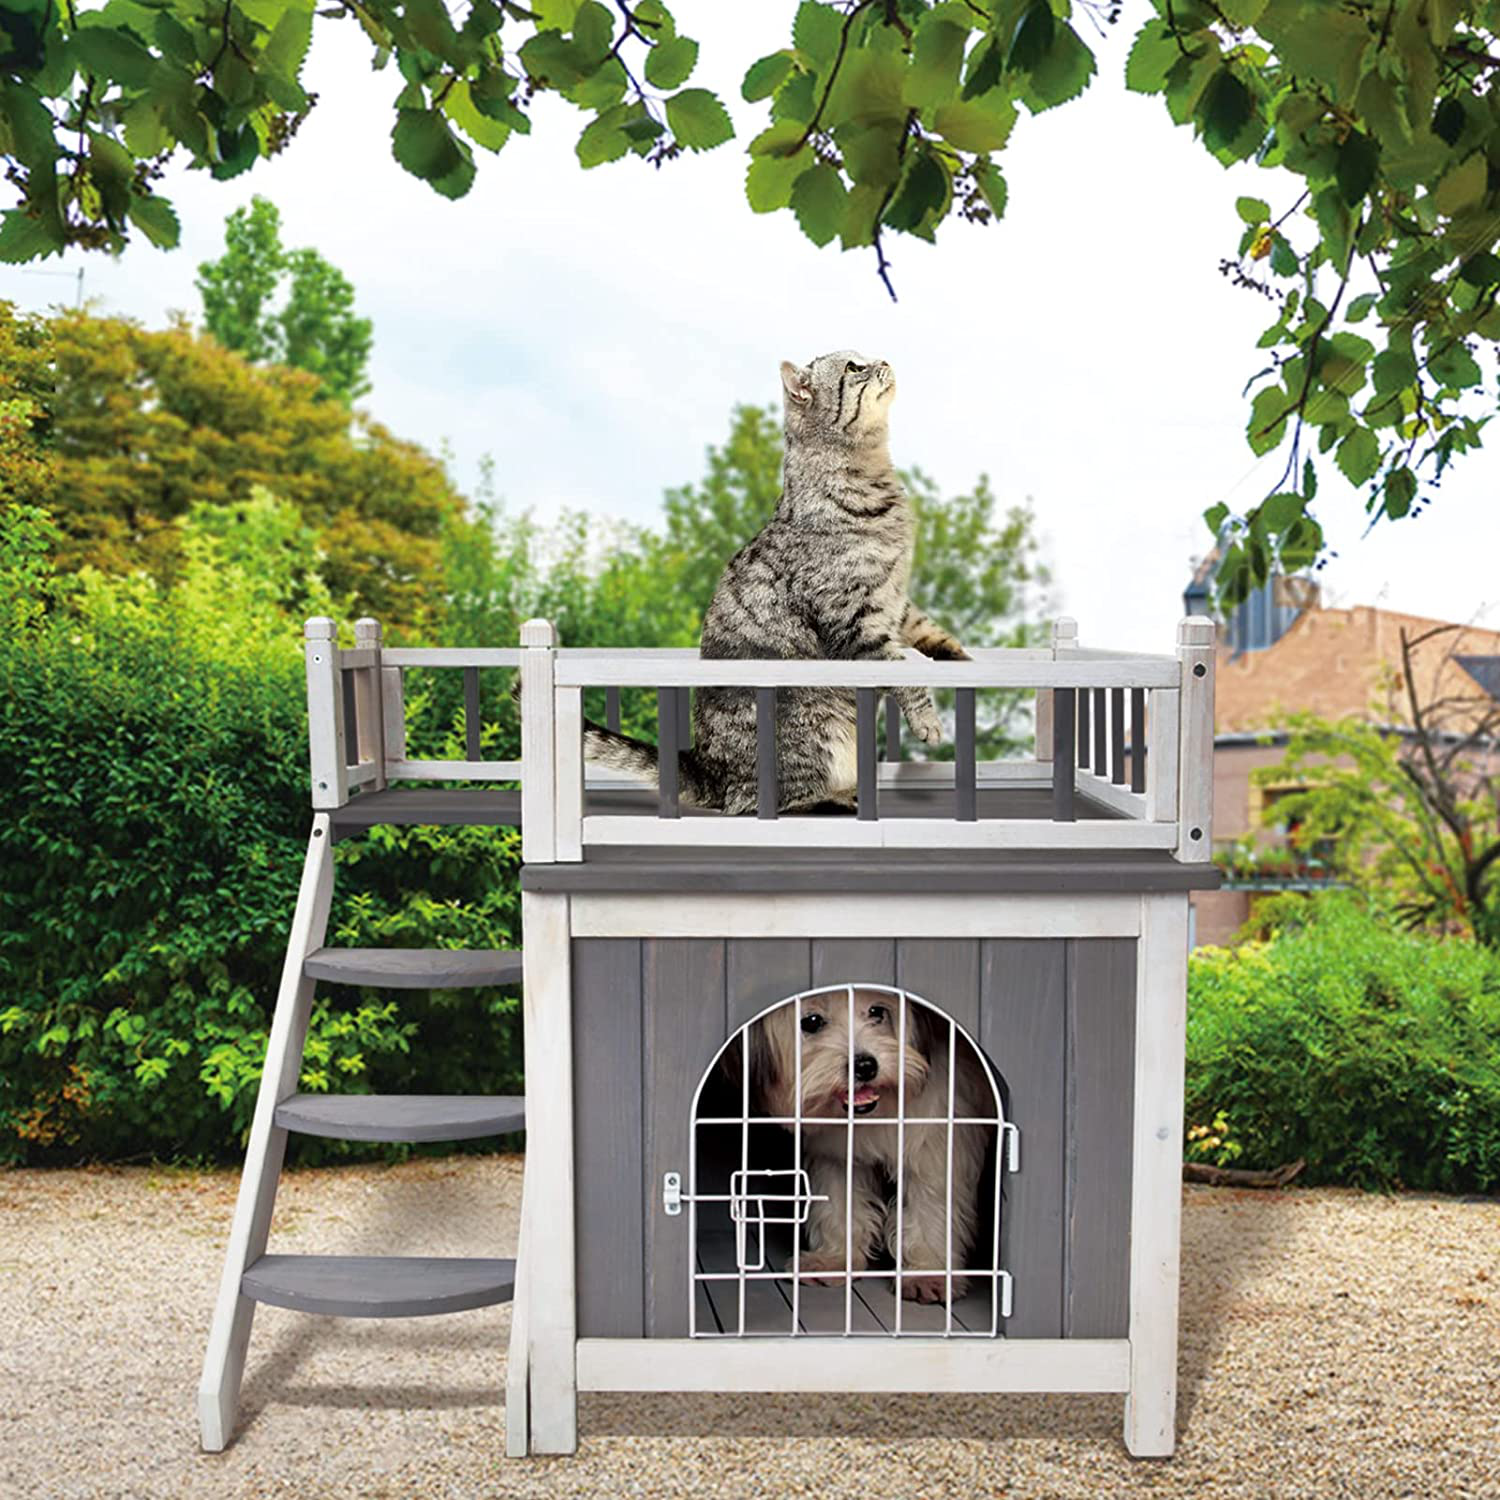 Petsfit Dog House Cat Houses for Indoor Cats, Dog Houses for Small Dogs with Side Window, Connect the Pet Stairs